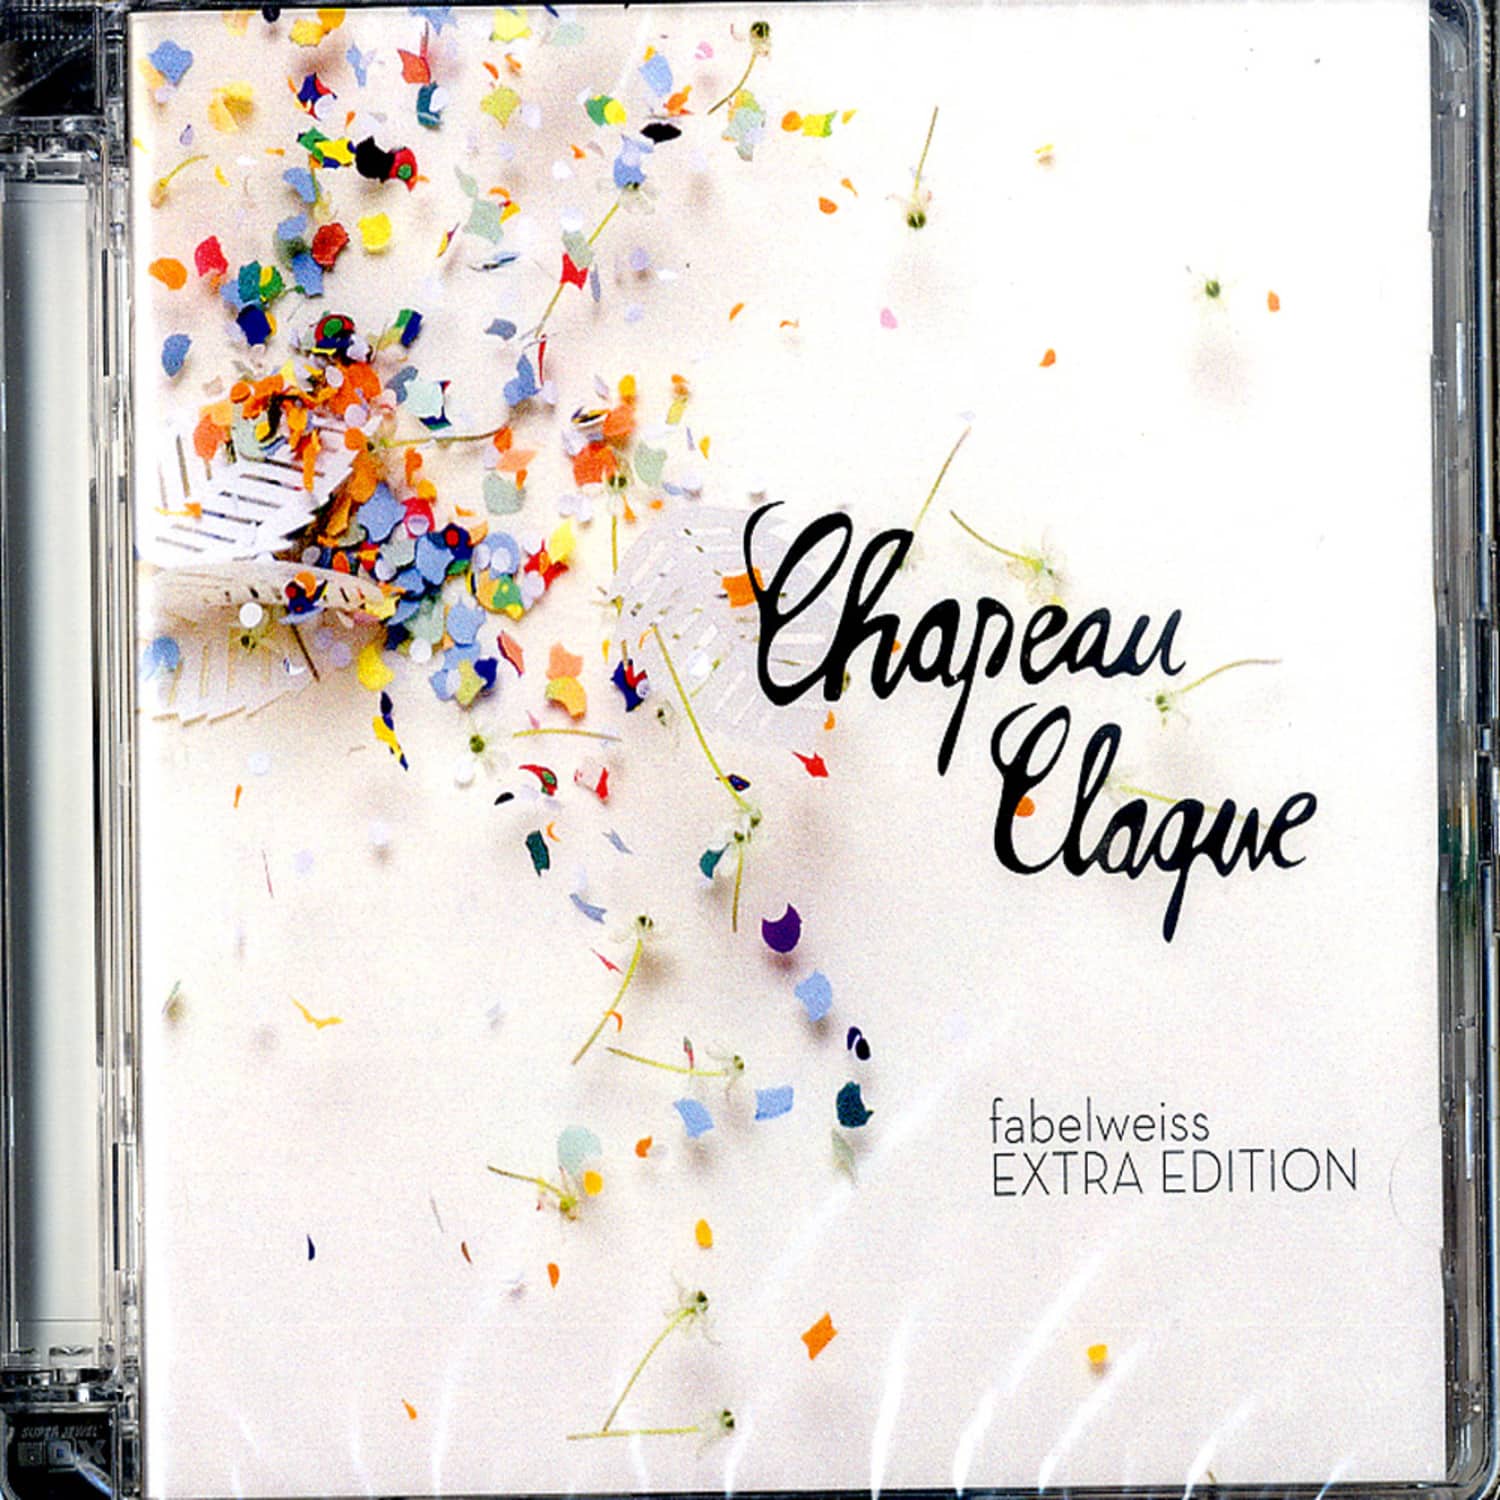 Chapeau Claque - FABELWEISS EXTRA EDITION 